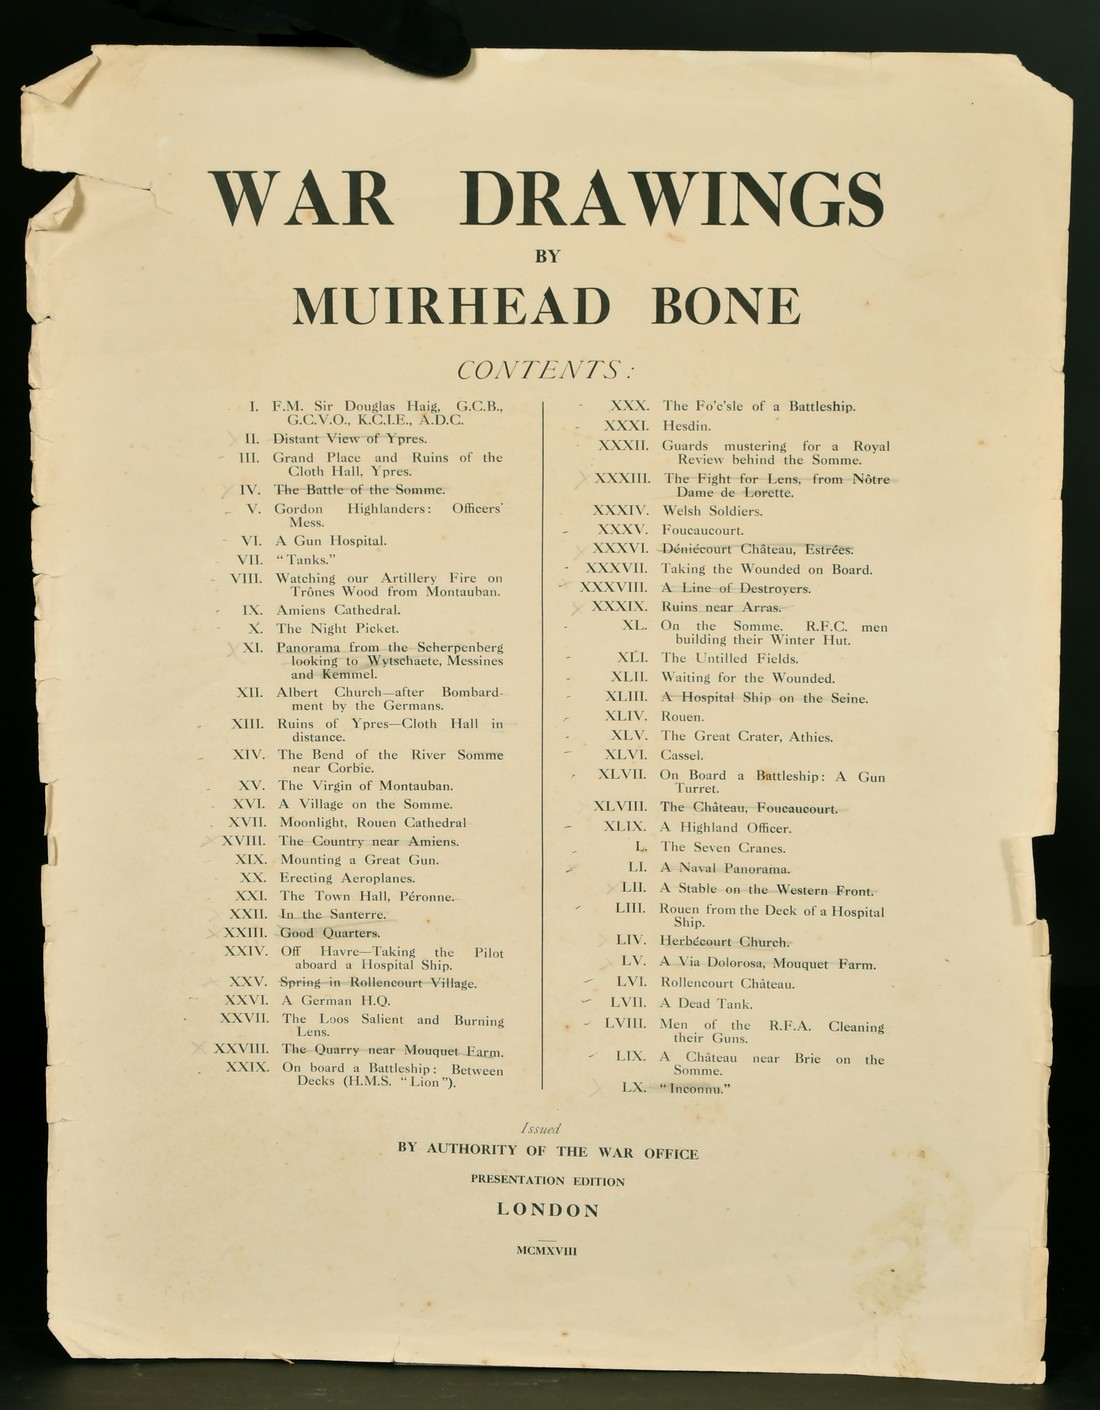 War Drawings by Muirhead Bone, Presentation Edition issued by the War Office, cover missing and some - Image 2 of 4